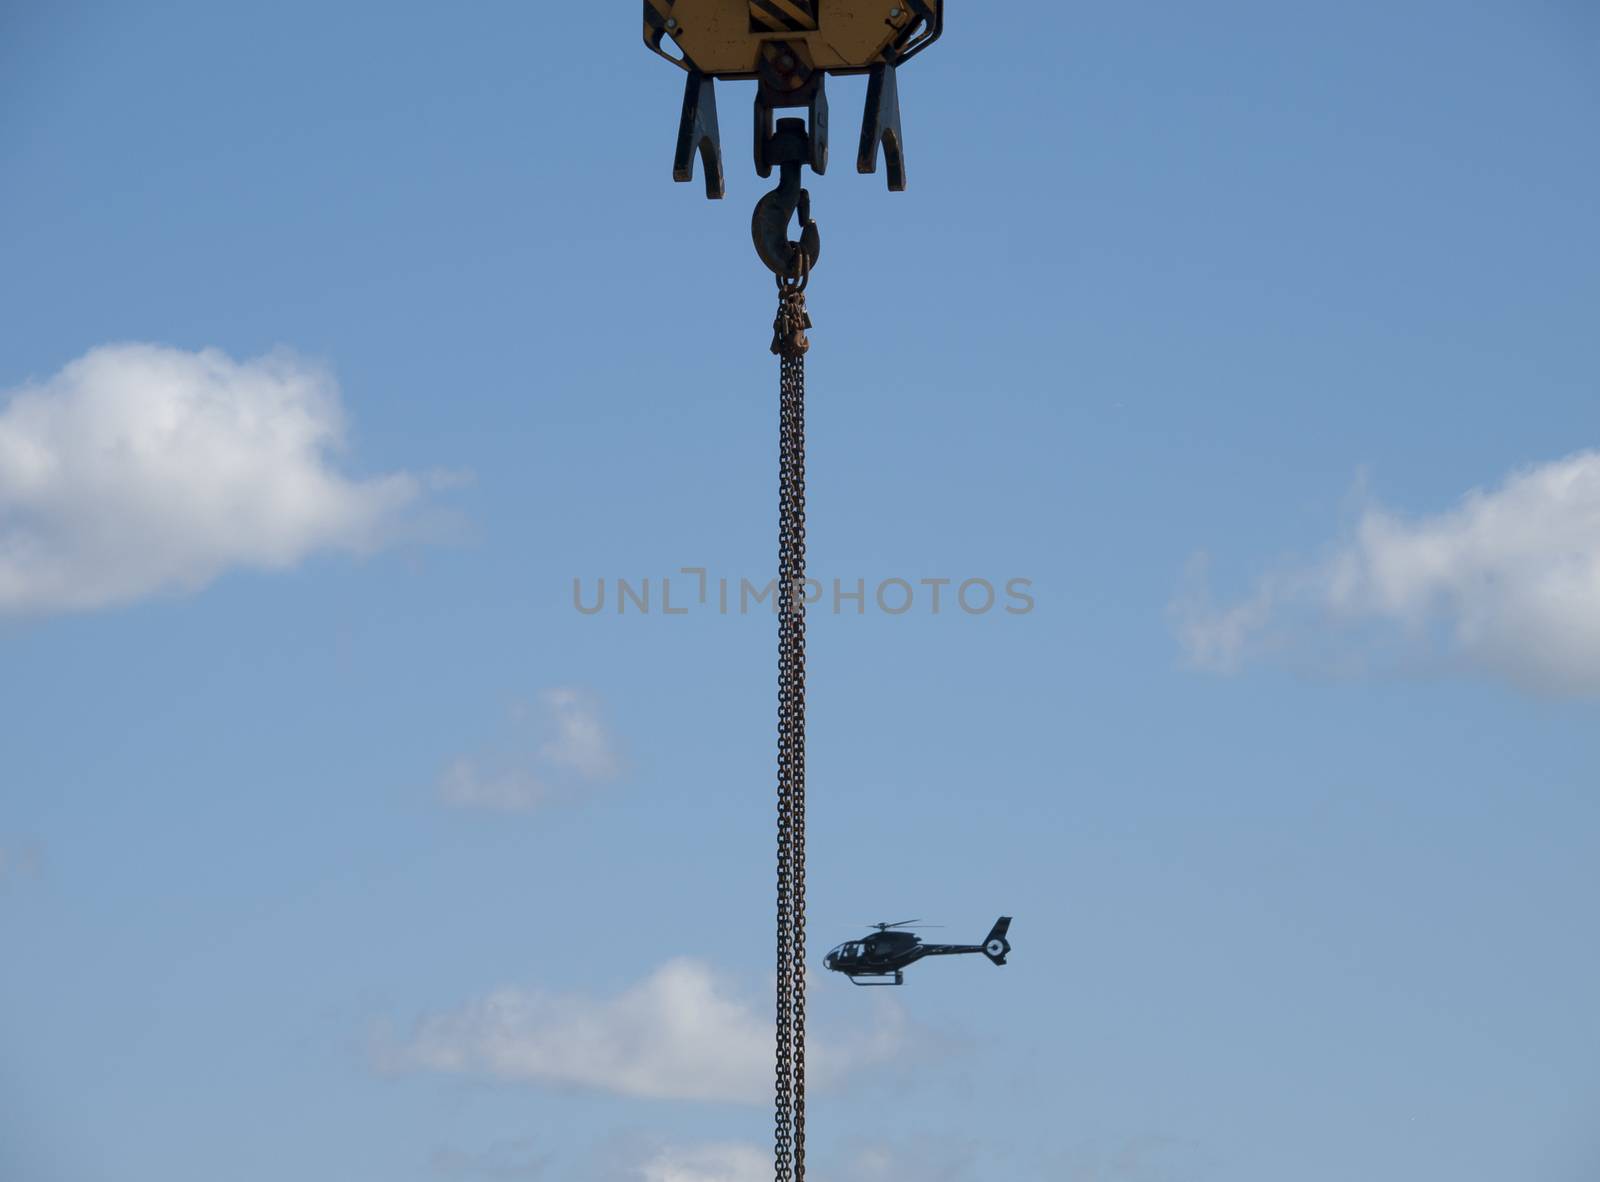 construction crane and a helicopter by kees59